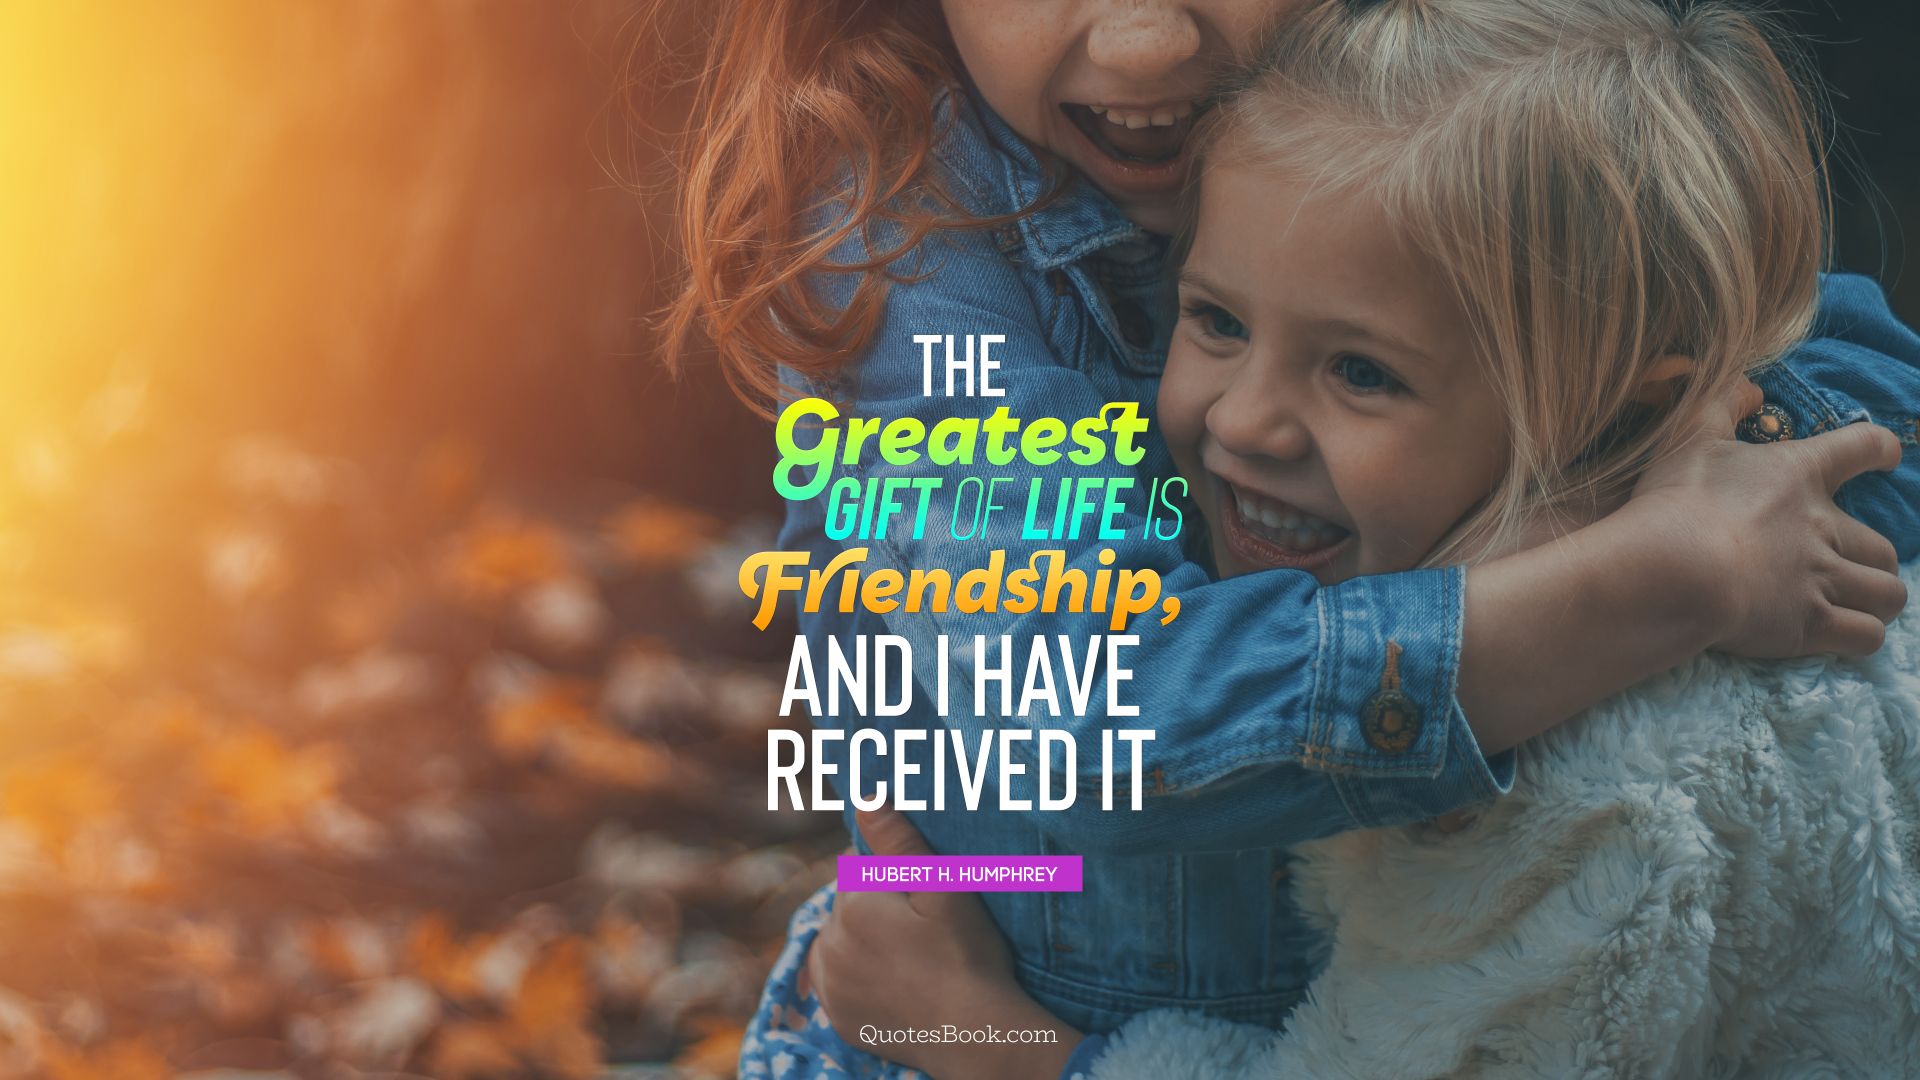 The greatest gift of life is friendship, and I have received it. - Quote by Hubert H. Humphrey